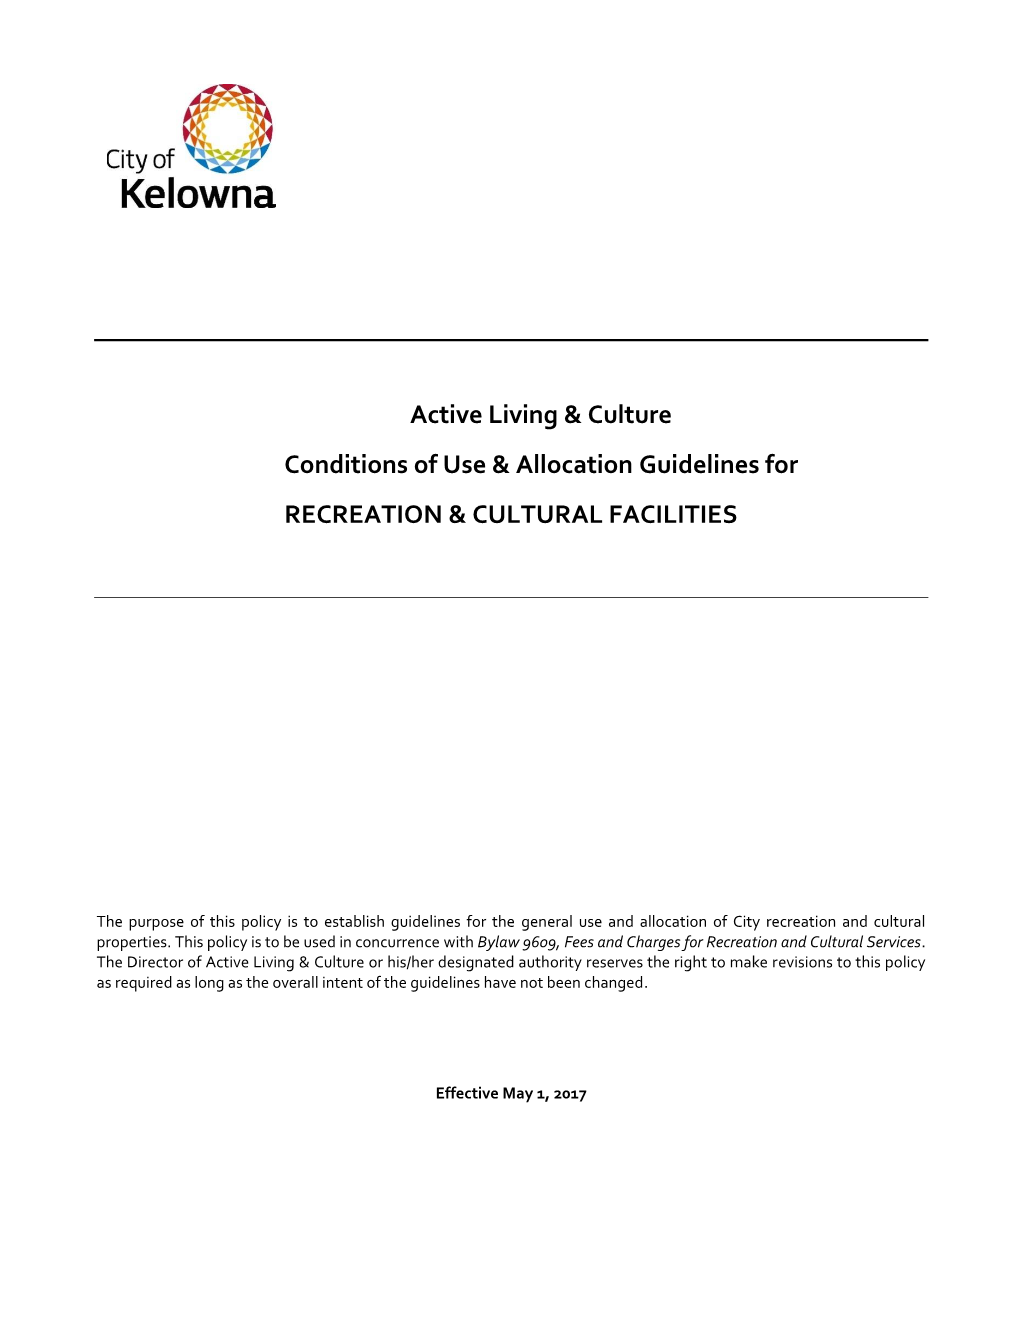 Active Living & Culture Conditions of Use & Allocation Guidelines for RECREATION & CULTURAL FACILITIES